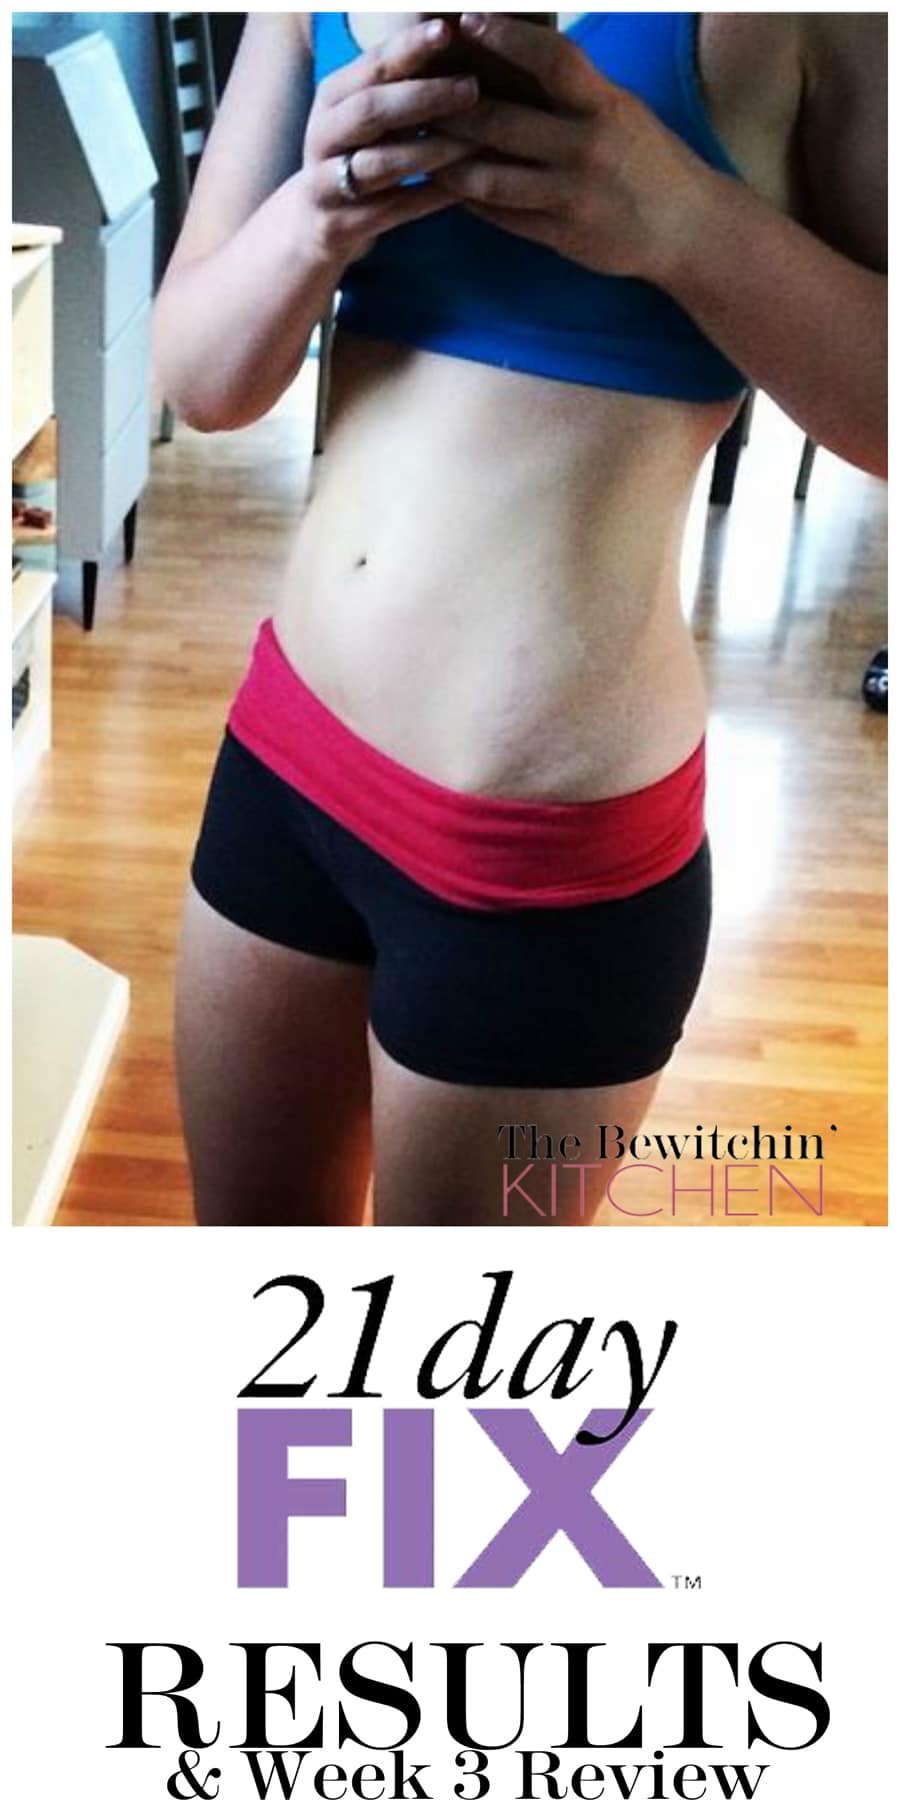 Beachbody's The 21 Day Fix Review & Amazing Results